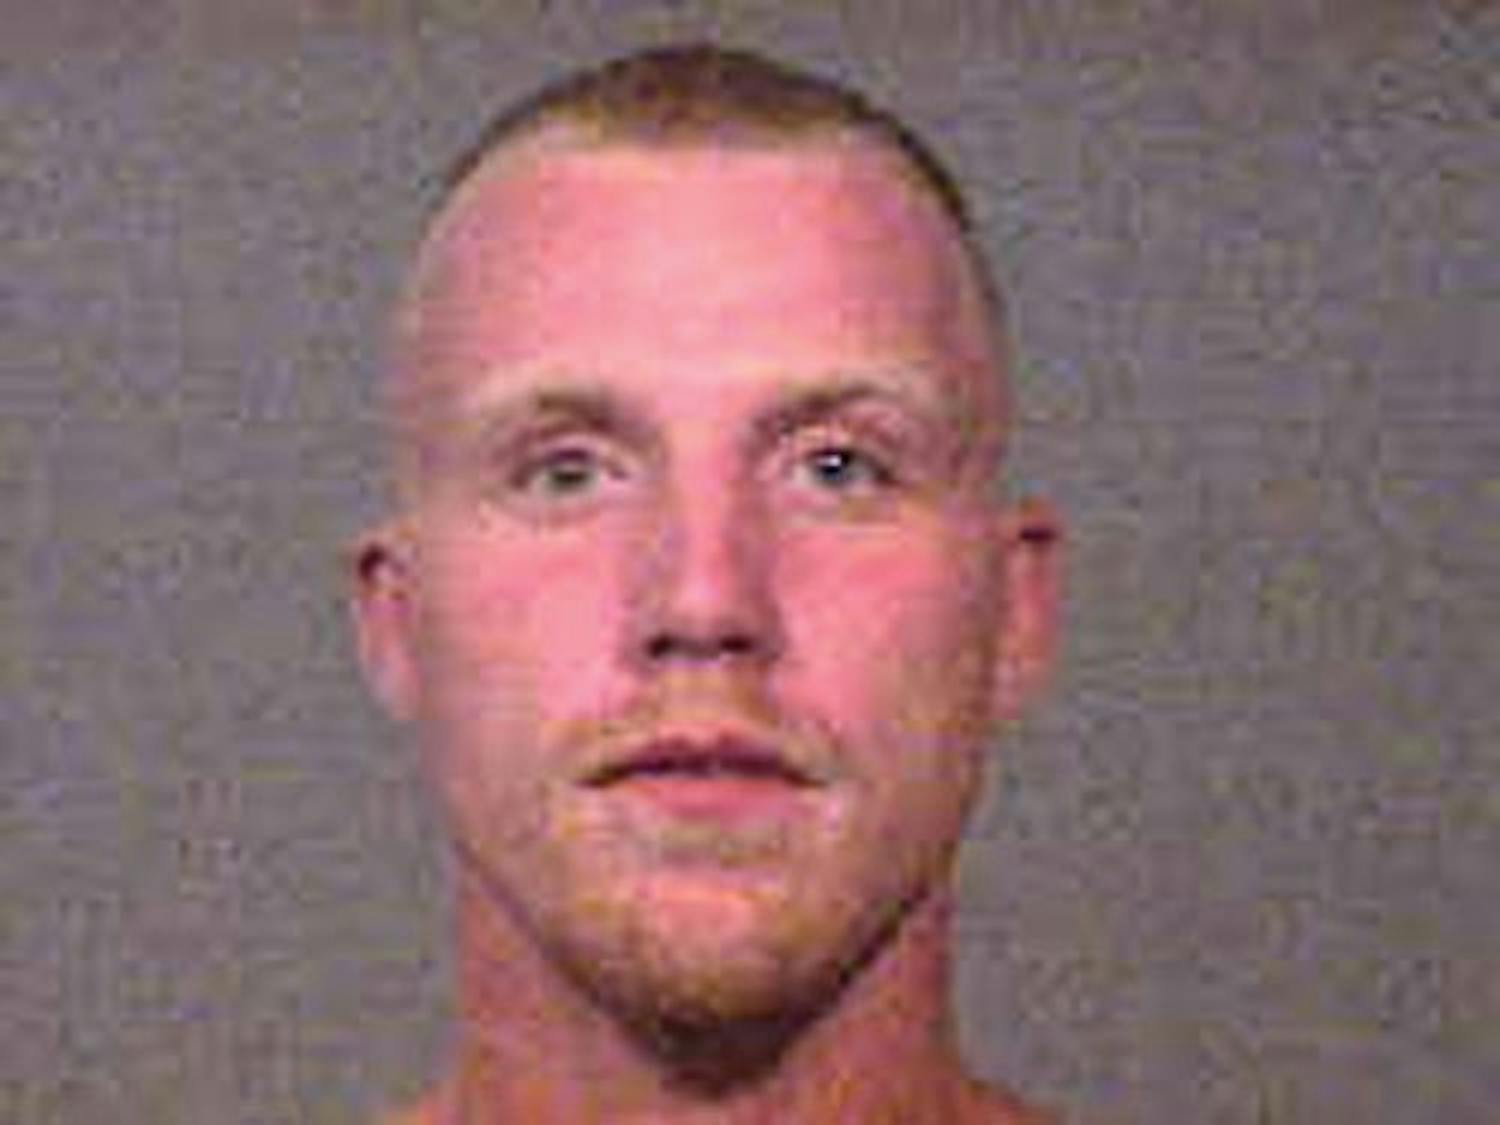 Man faces charges of burglary, kidnapping  